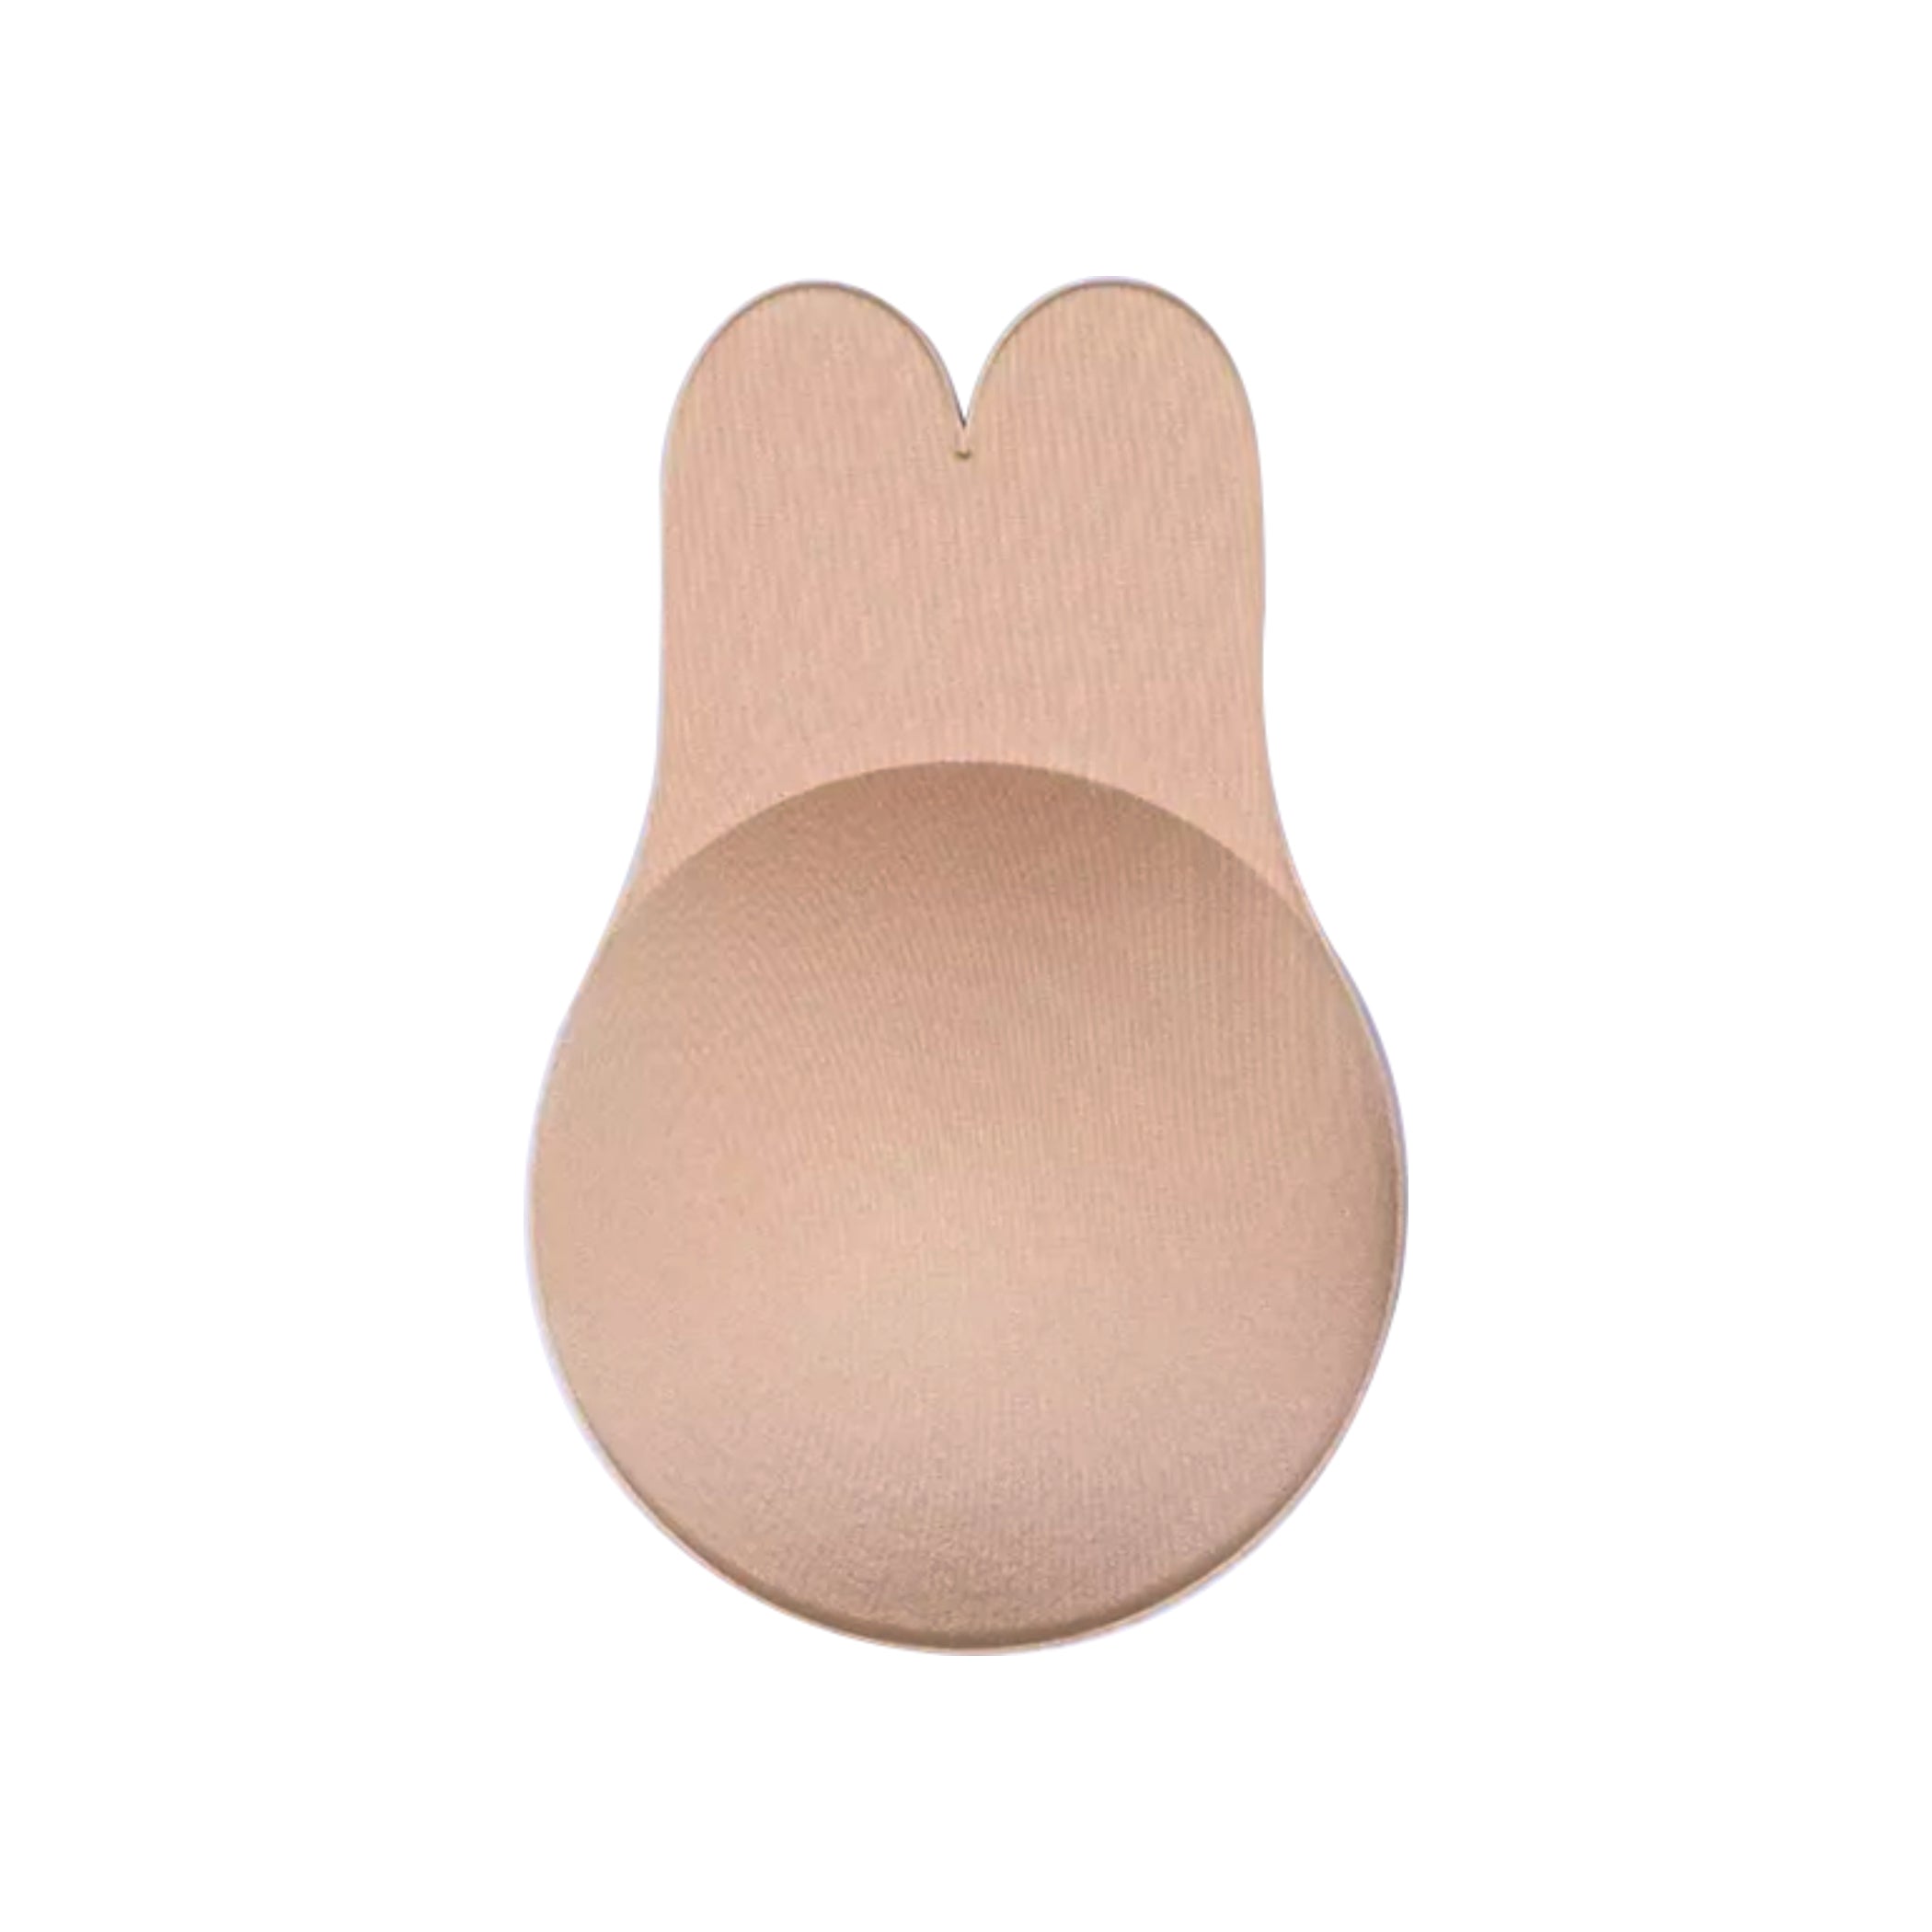 Up To 85% Off on 2Pair Rabbit Nipplecovers Lif